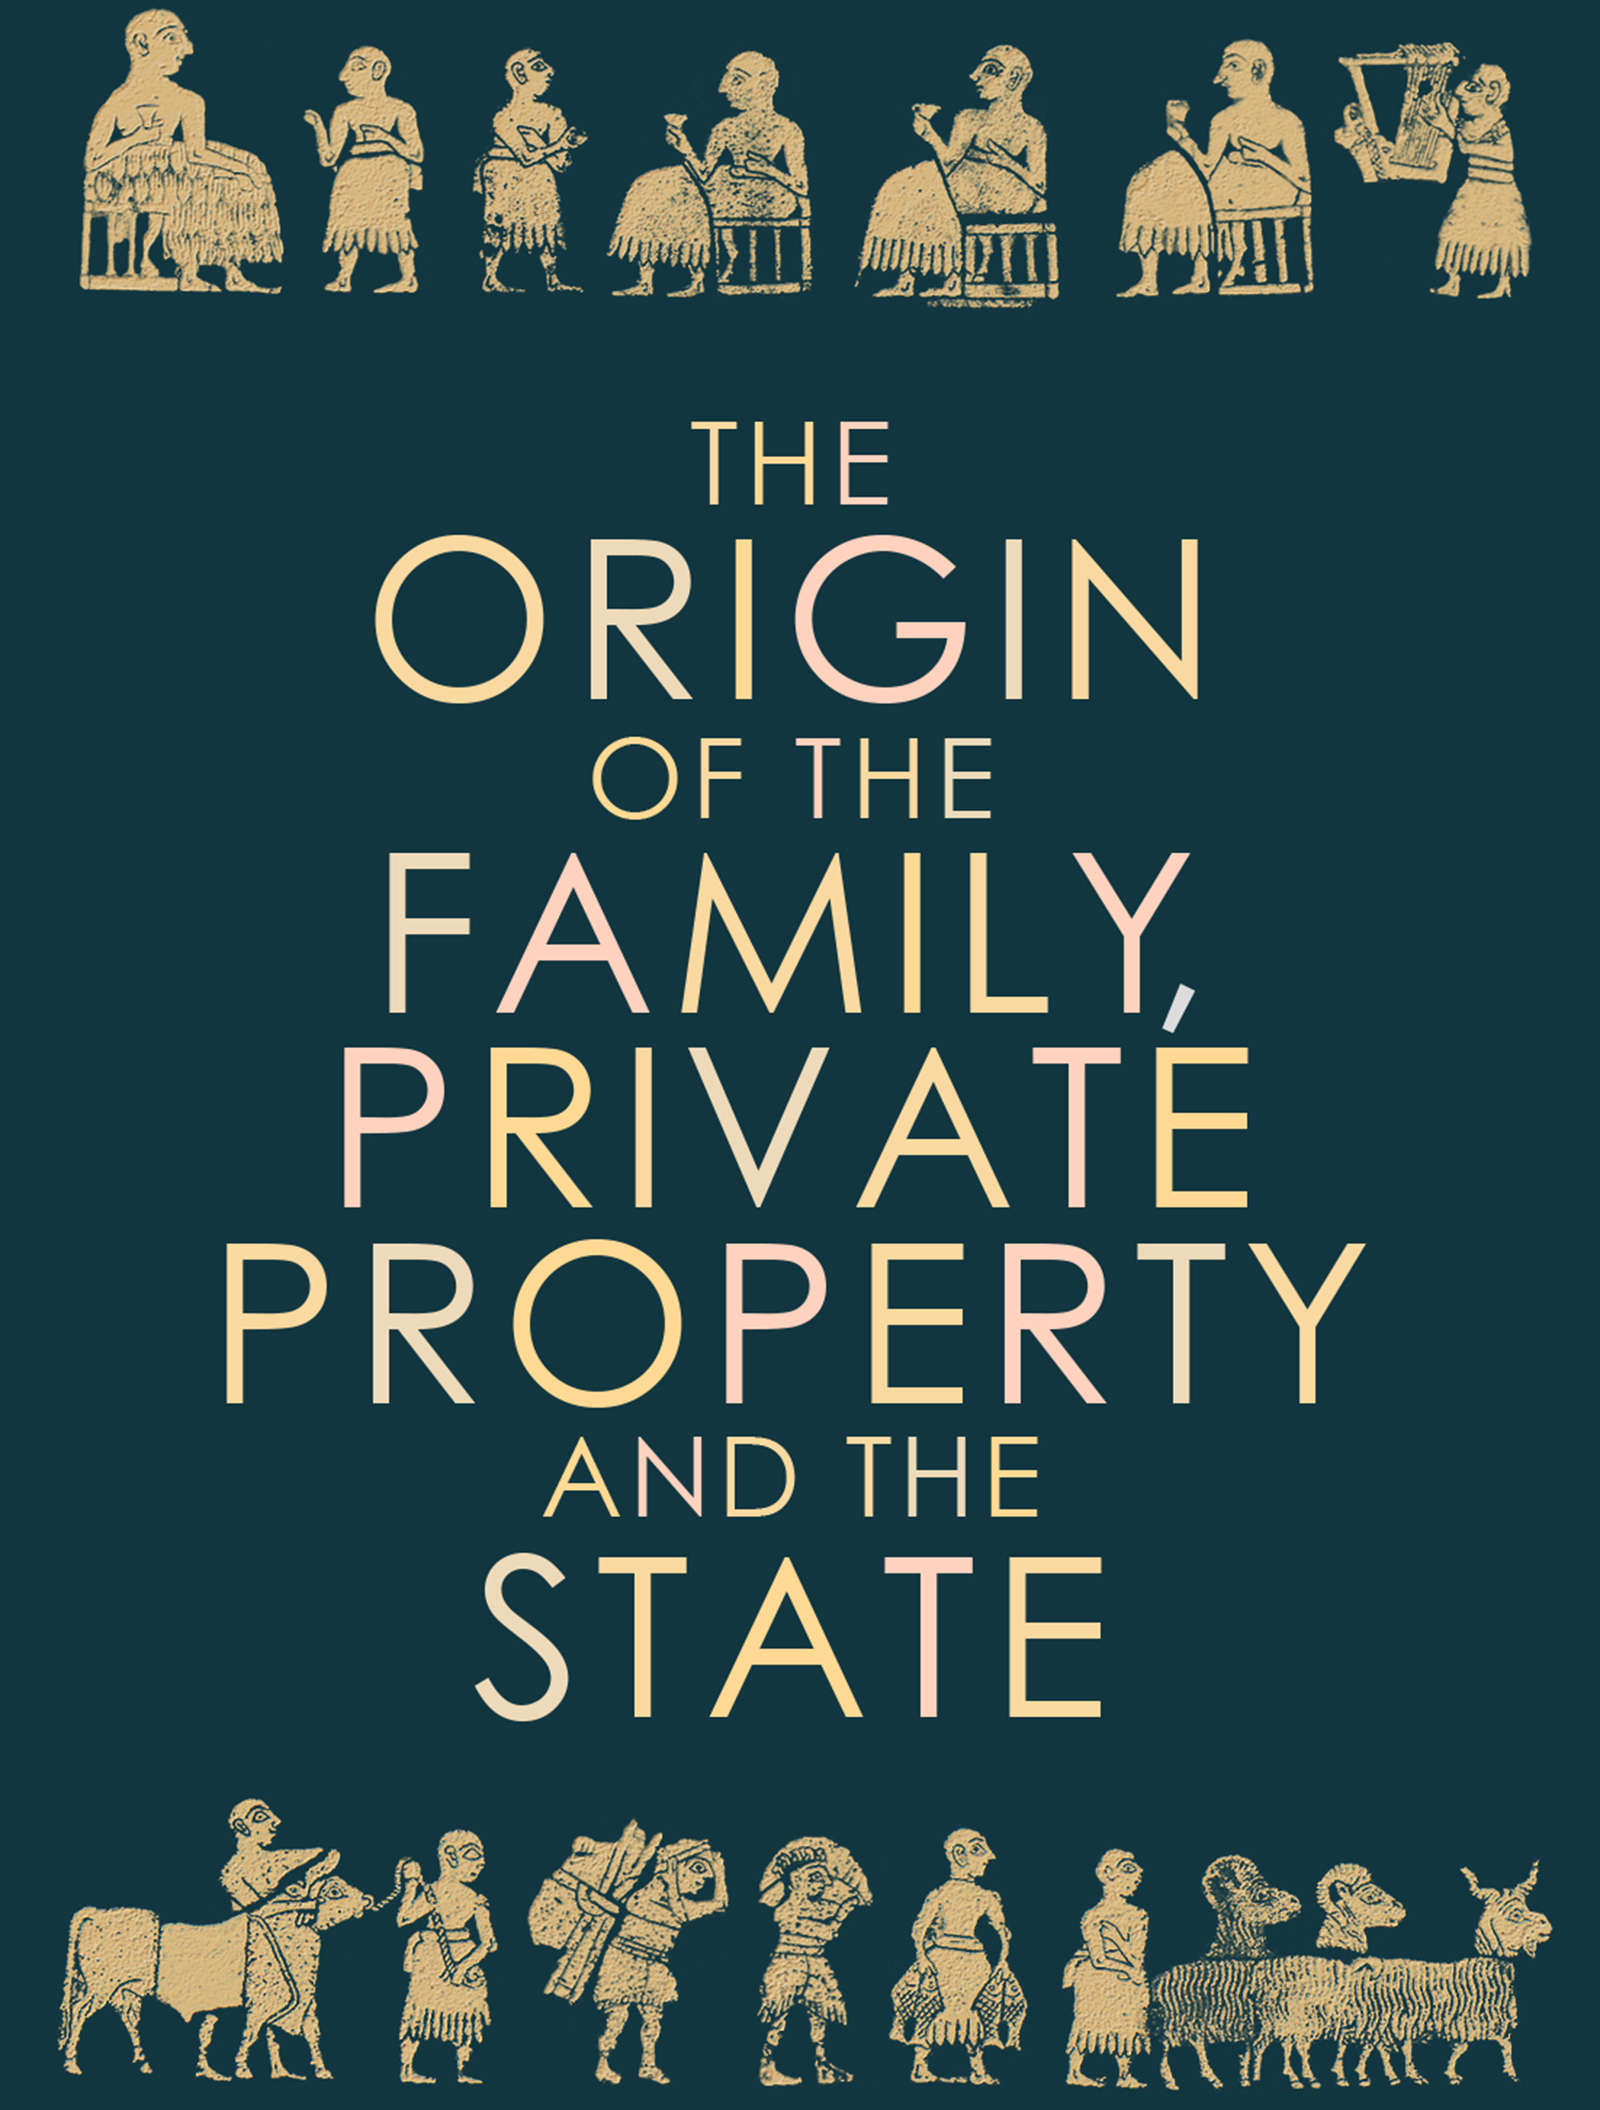 Classics] The Origin of the Family, Private Property and the State